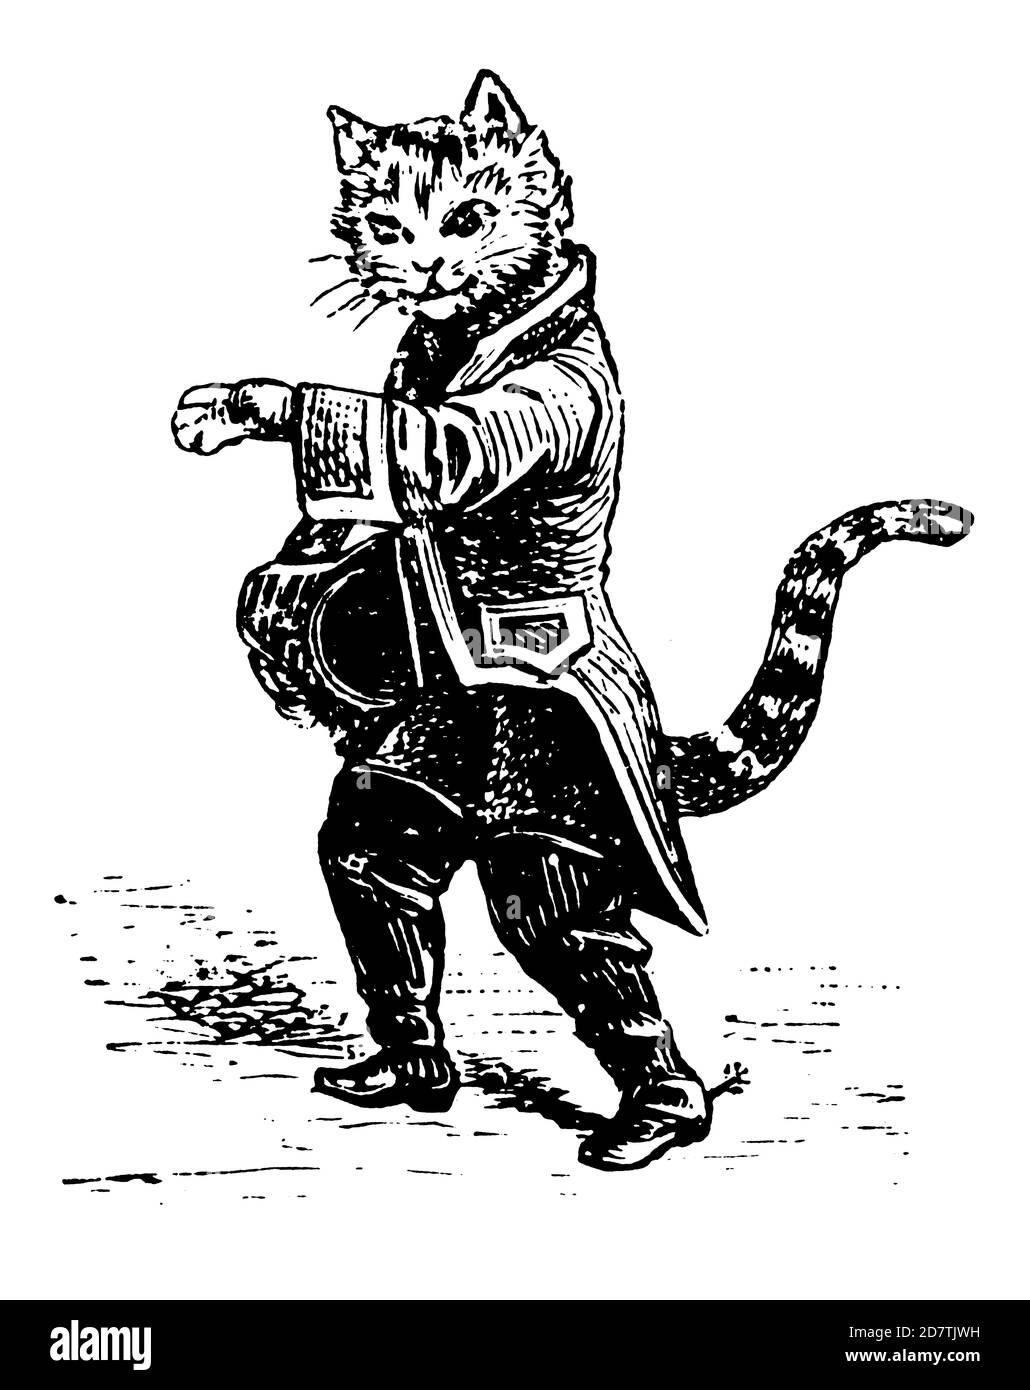 Antique engraving of the Puss in boots (isolated on white). Published in Specimens des divers caracteres et vignettes typographiques de la fonderie by Stock Photo